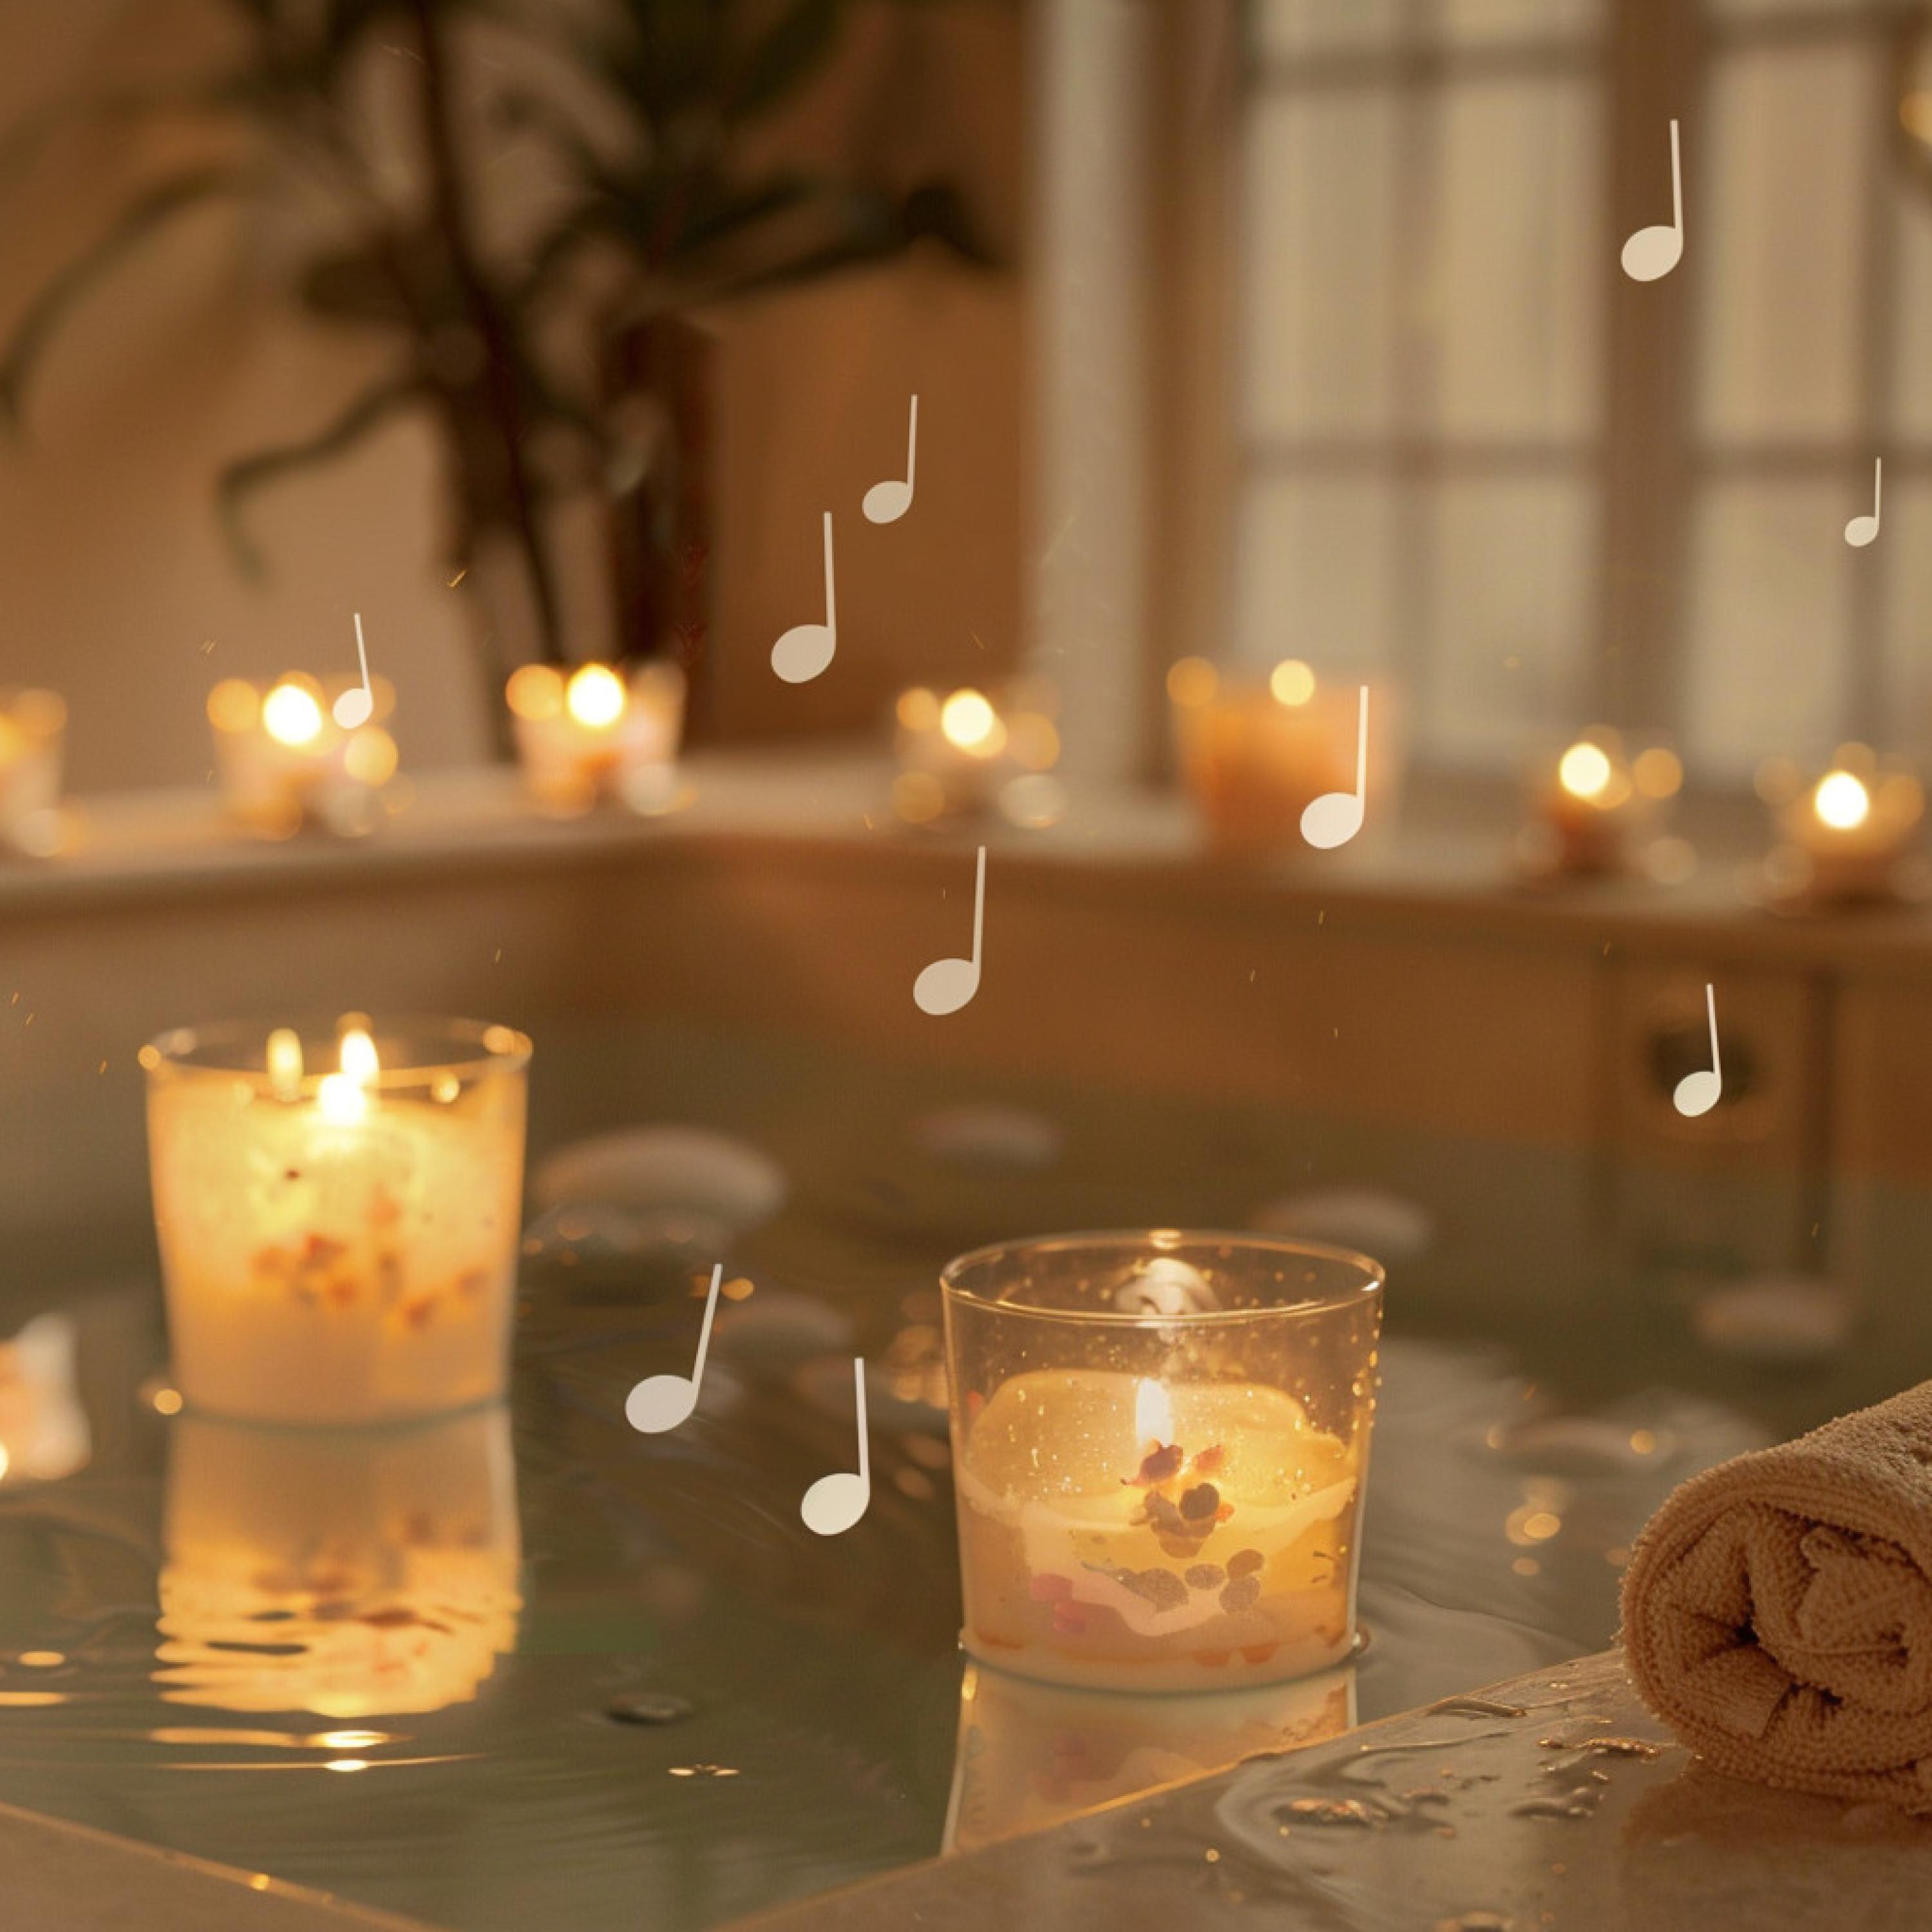 Pure Massage Music - Spa's Soothing Note